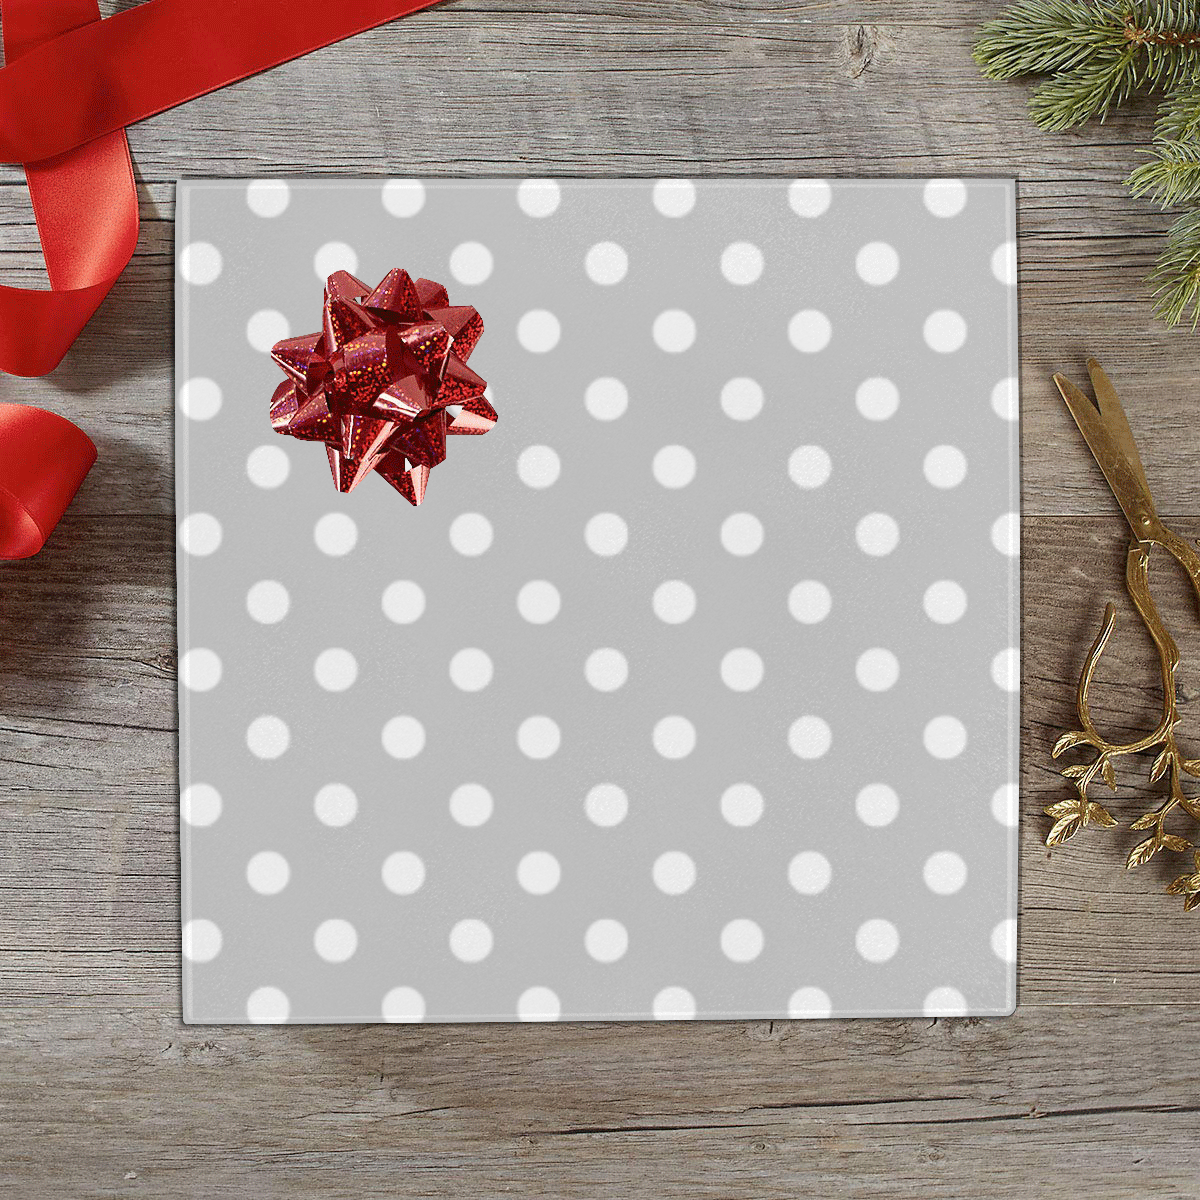 White Polka Dots on Silver Gift Wrapping Paper 58"x 23" (5 Rolls)